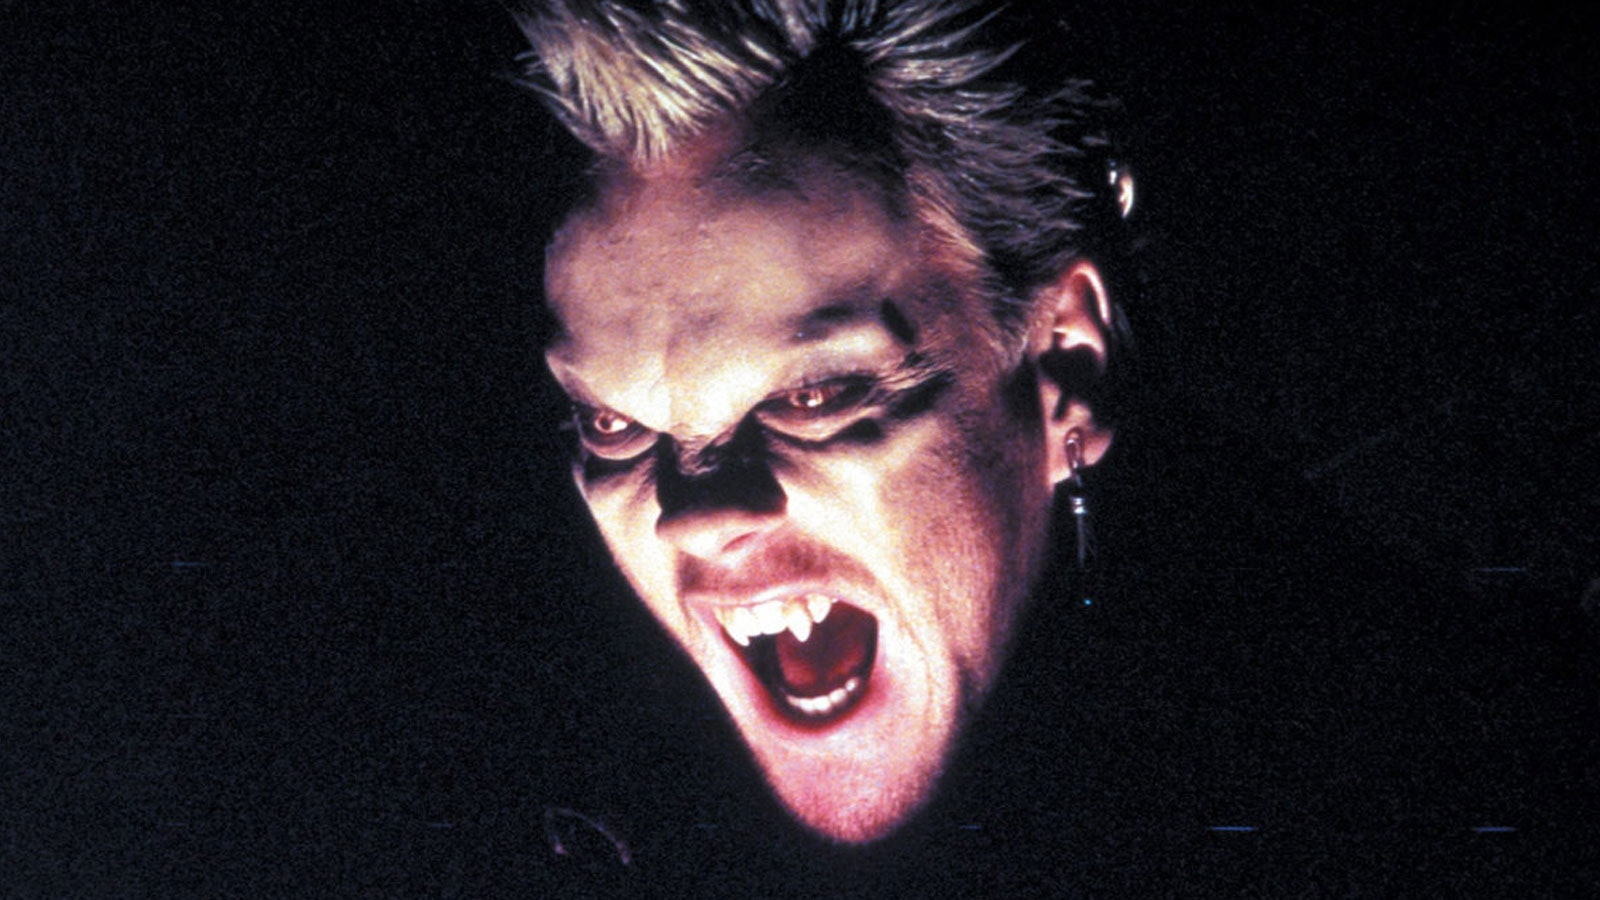 20 best vampire movies you should definitely check out on Netflix